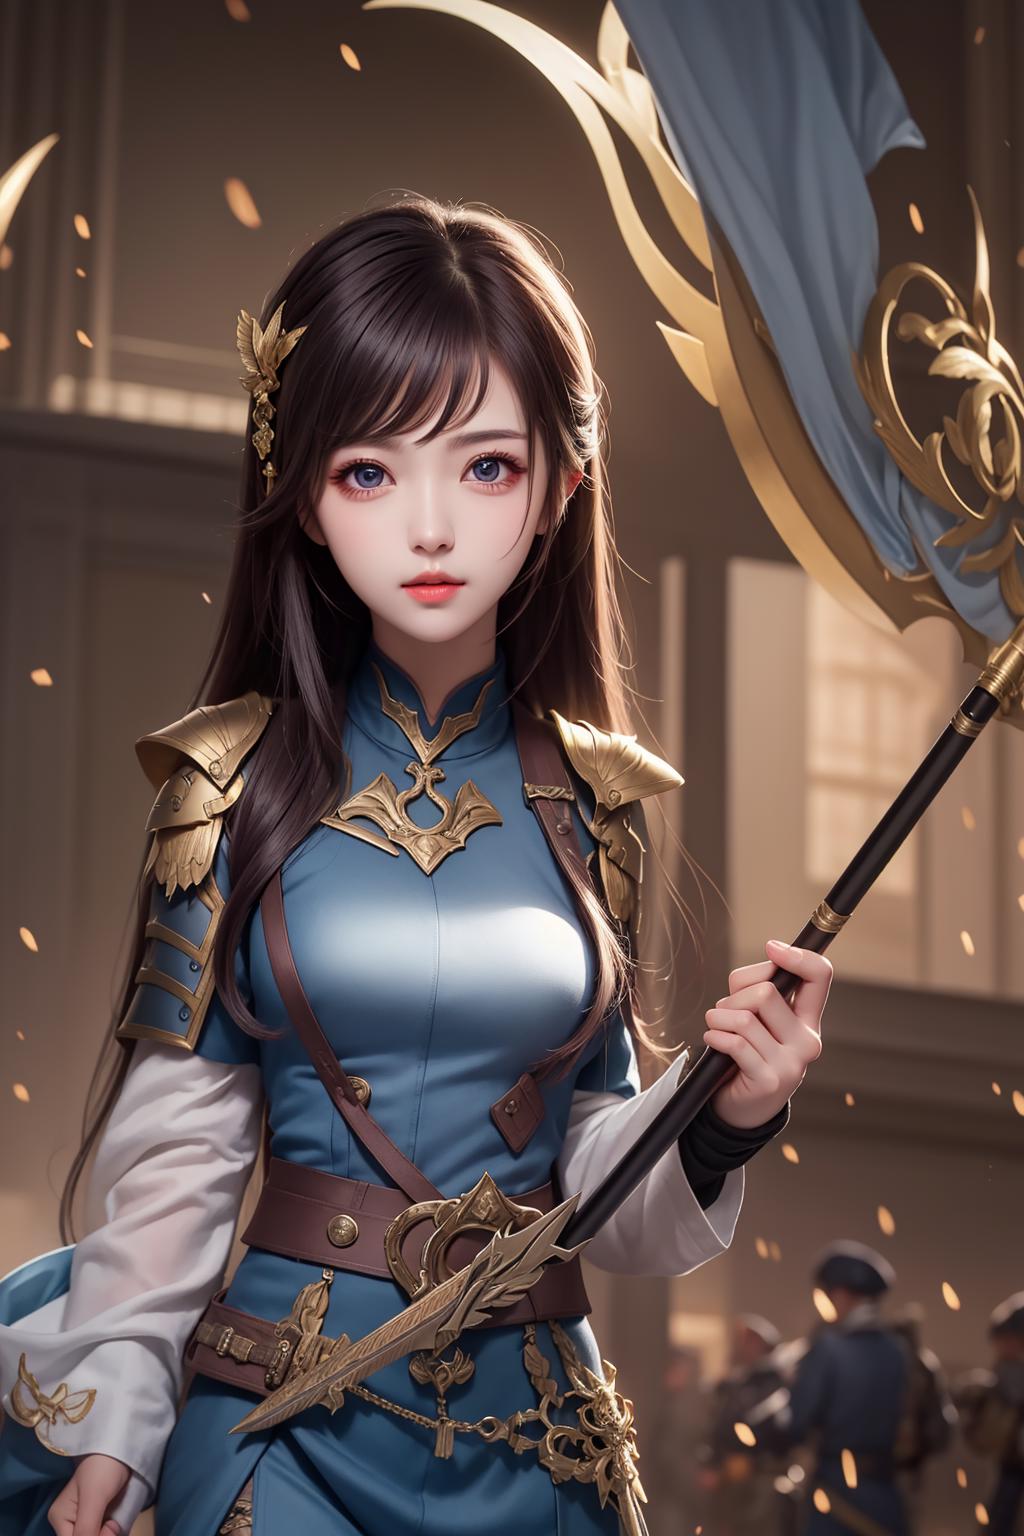 AI model image by Skywinzhang007